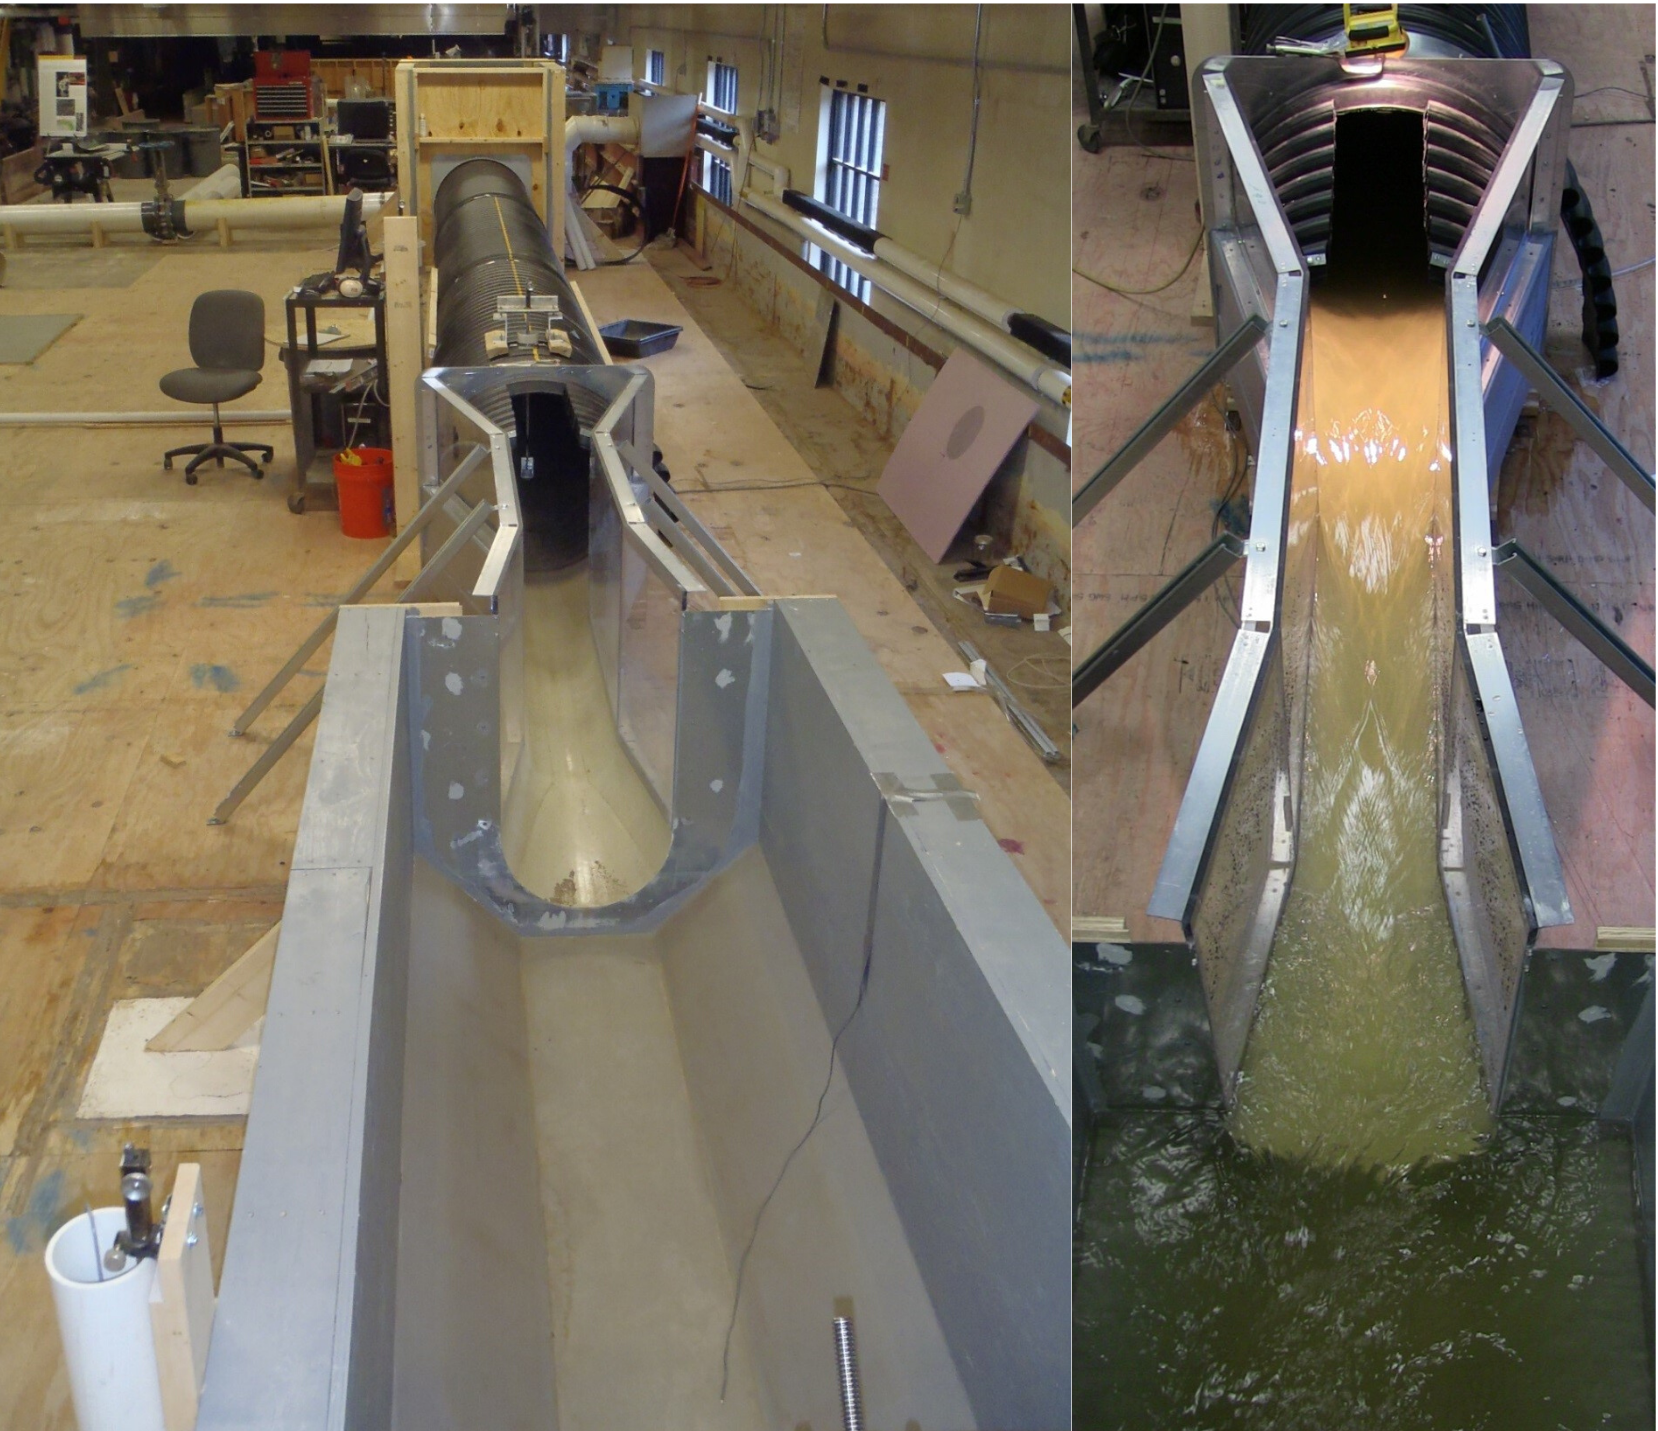 Photos of the U-flume model from above showing the shape of the test section 